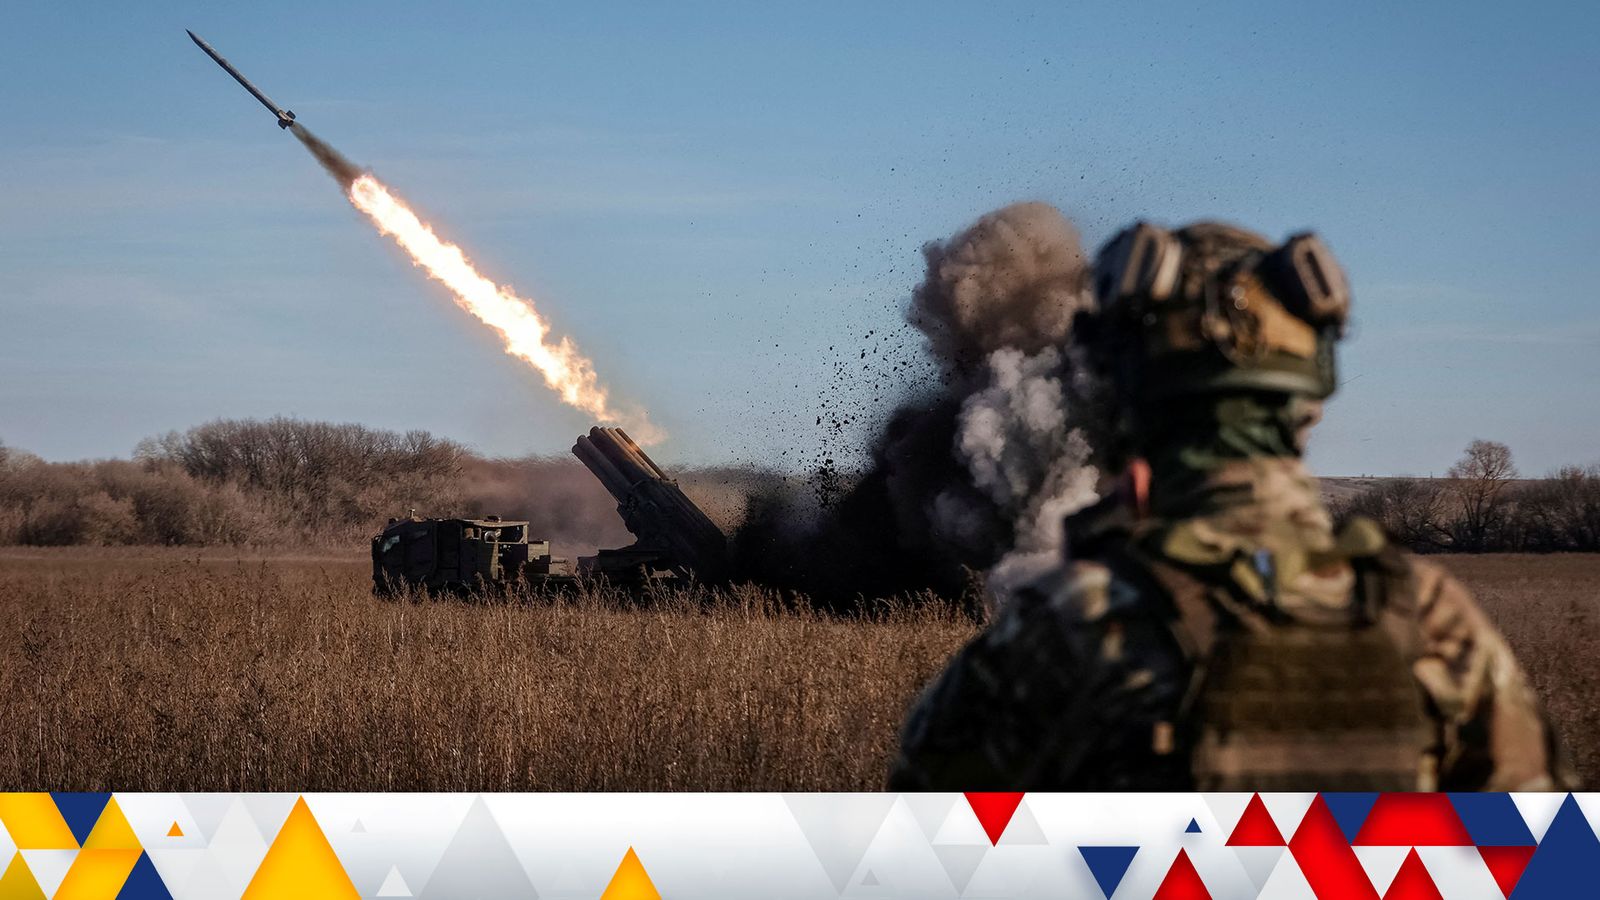 Ukraine war: NATO's focus is on heavy weapons and training - not sending fighter jets